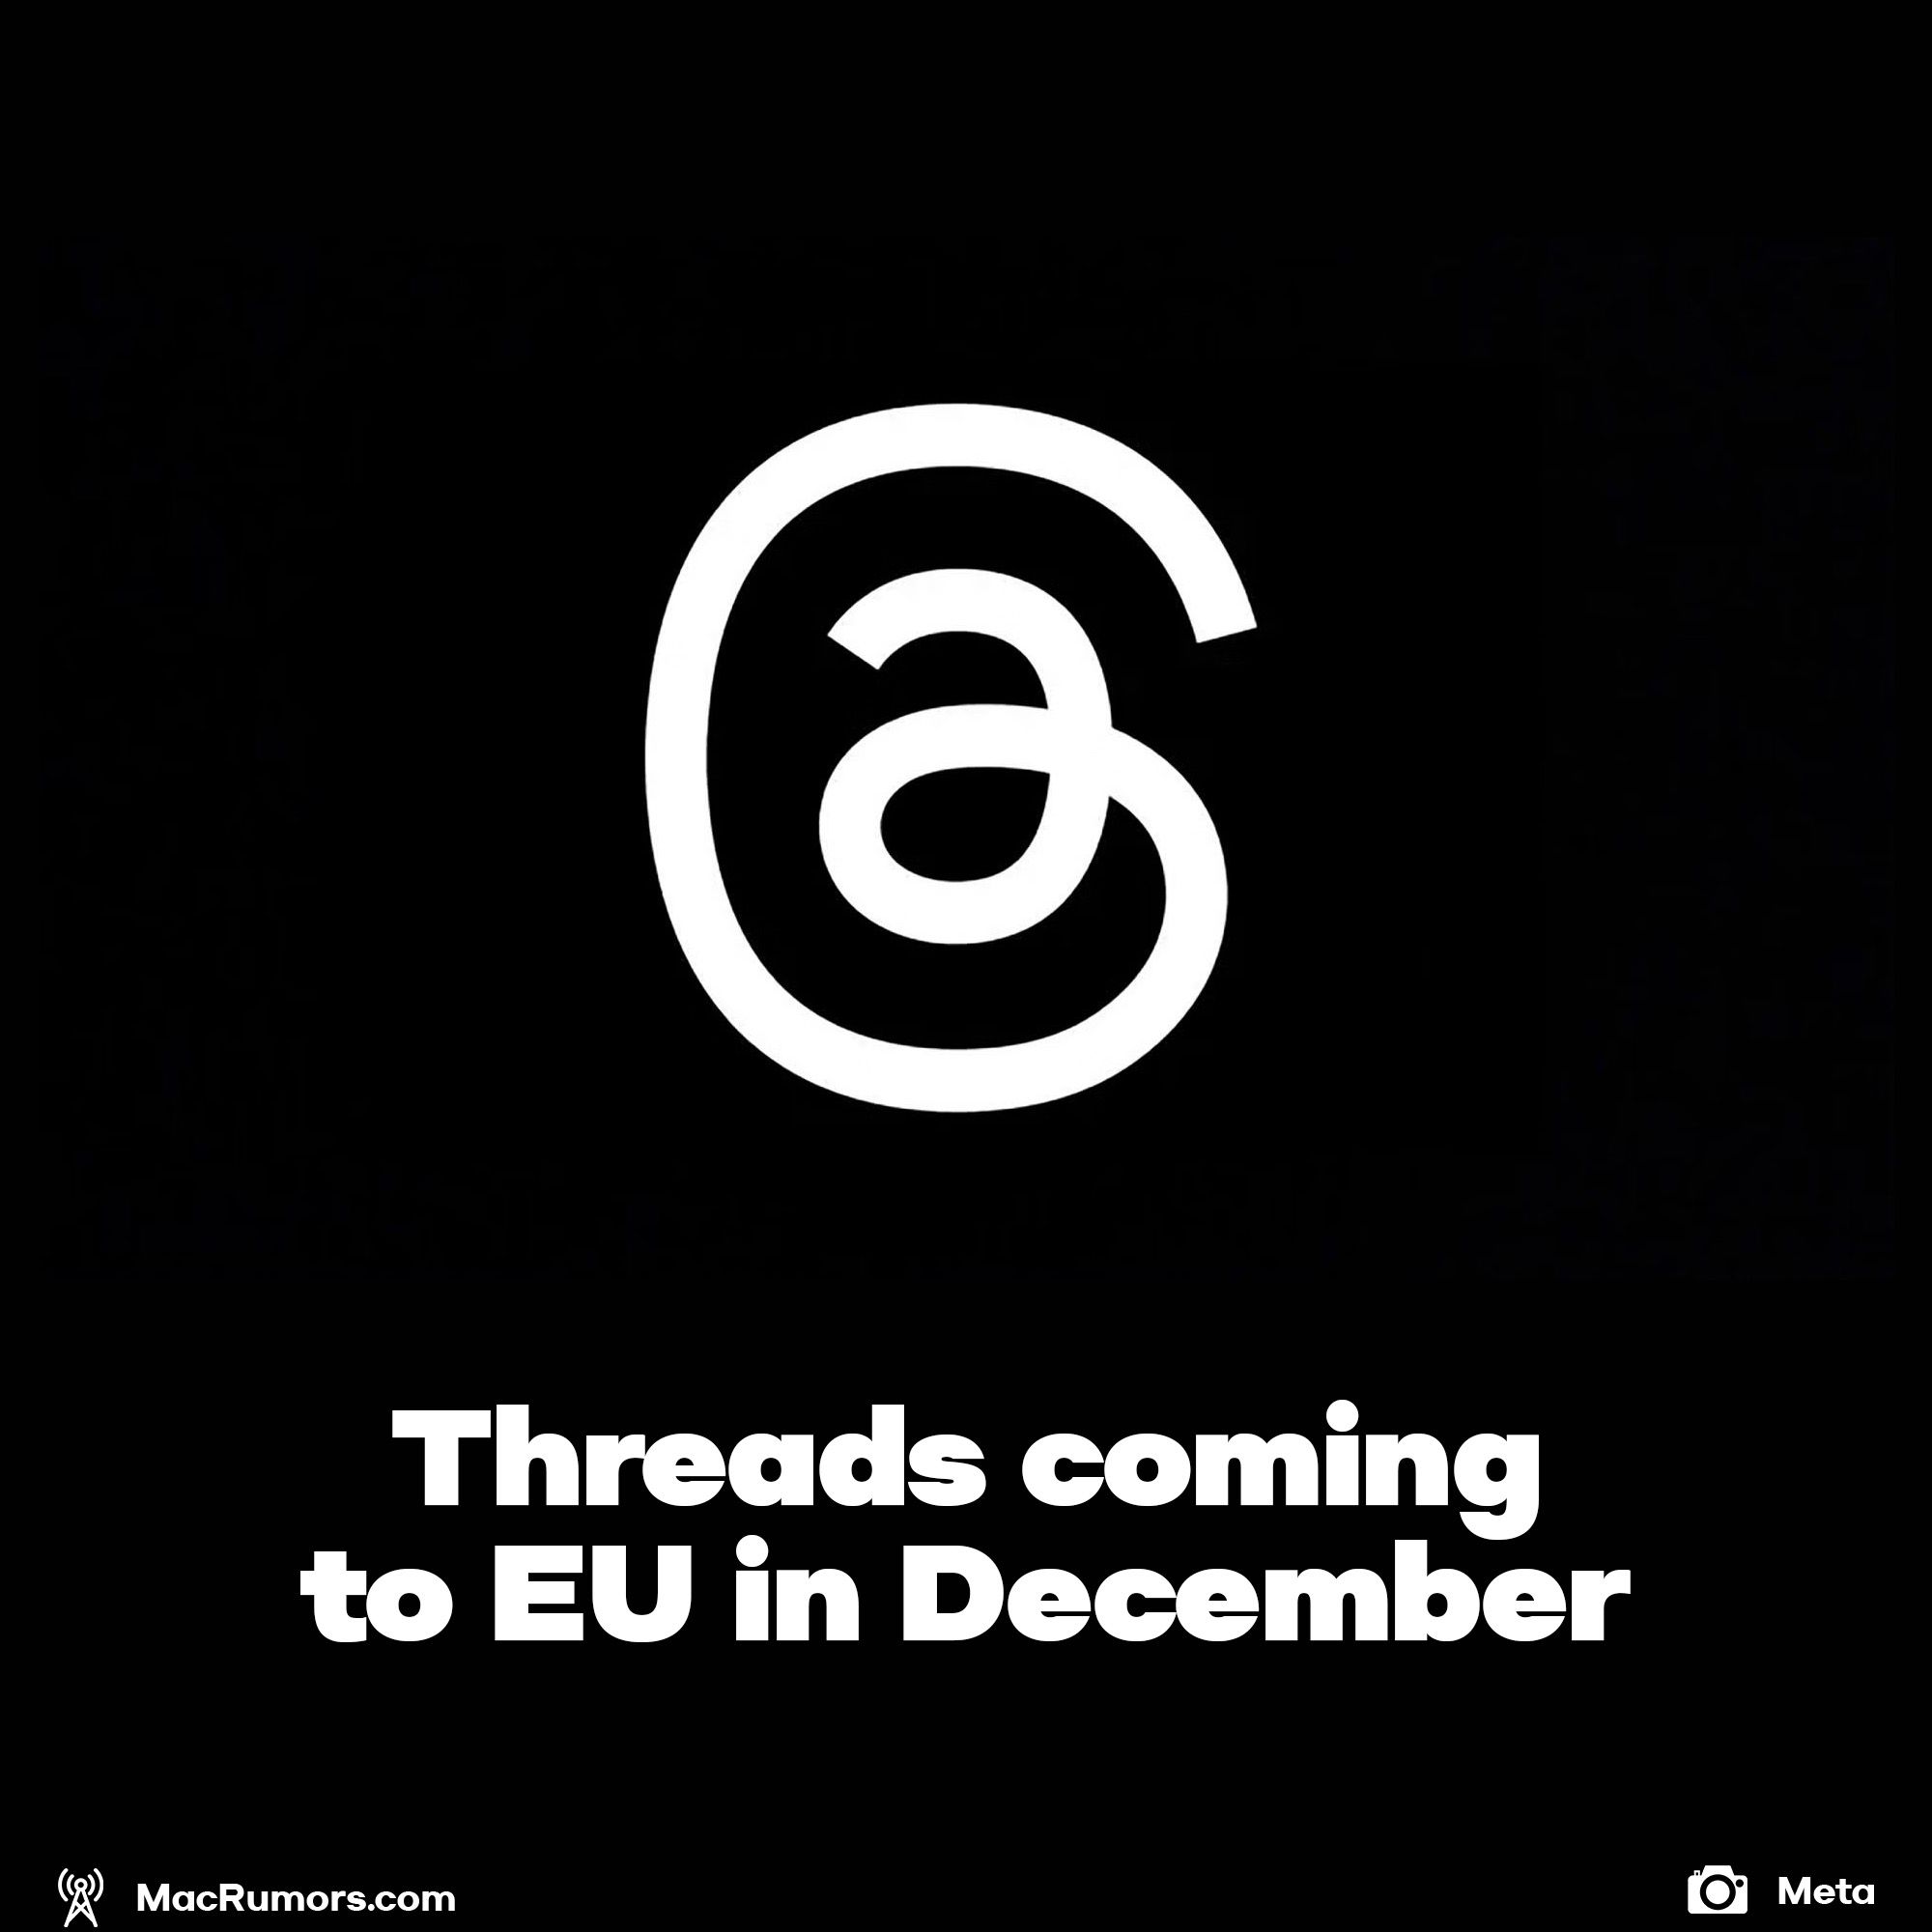 Threads coming to EU in December